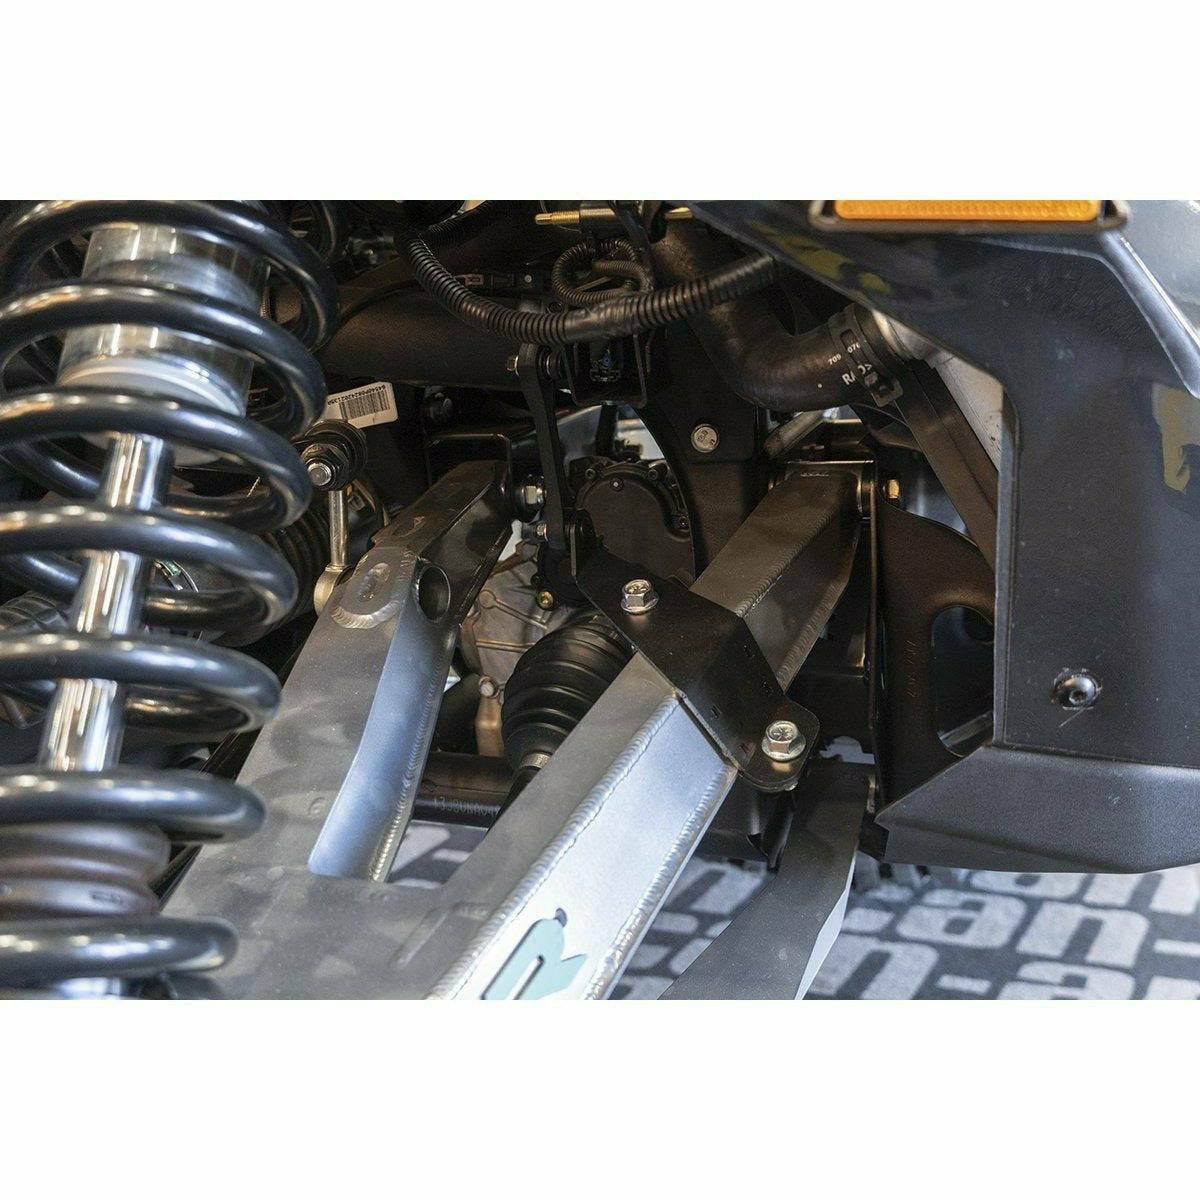 HCR Can Am X3 Smart Shock Brackets for HCR Control Arms